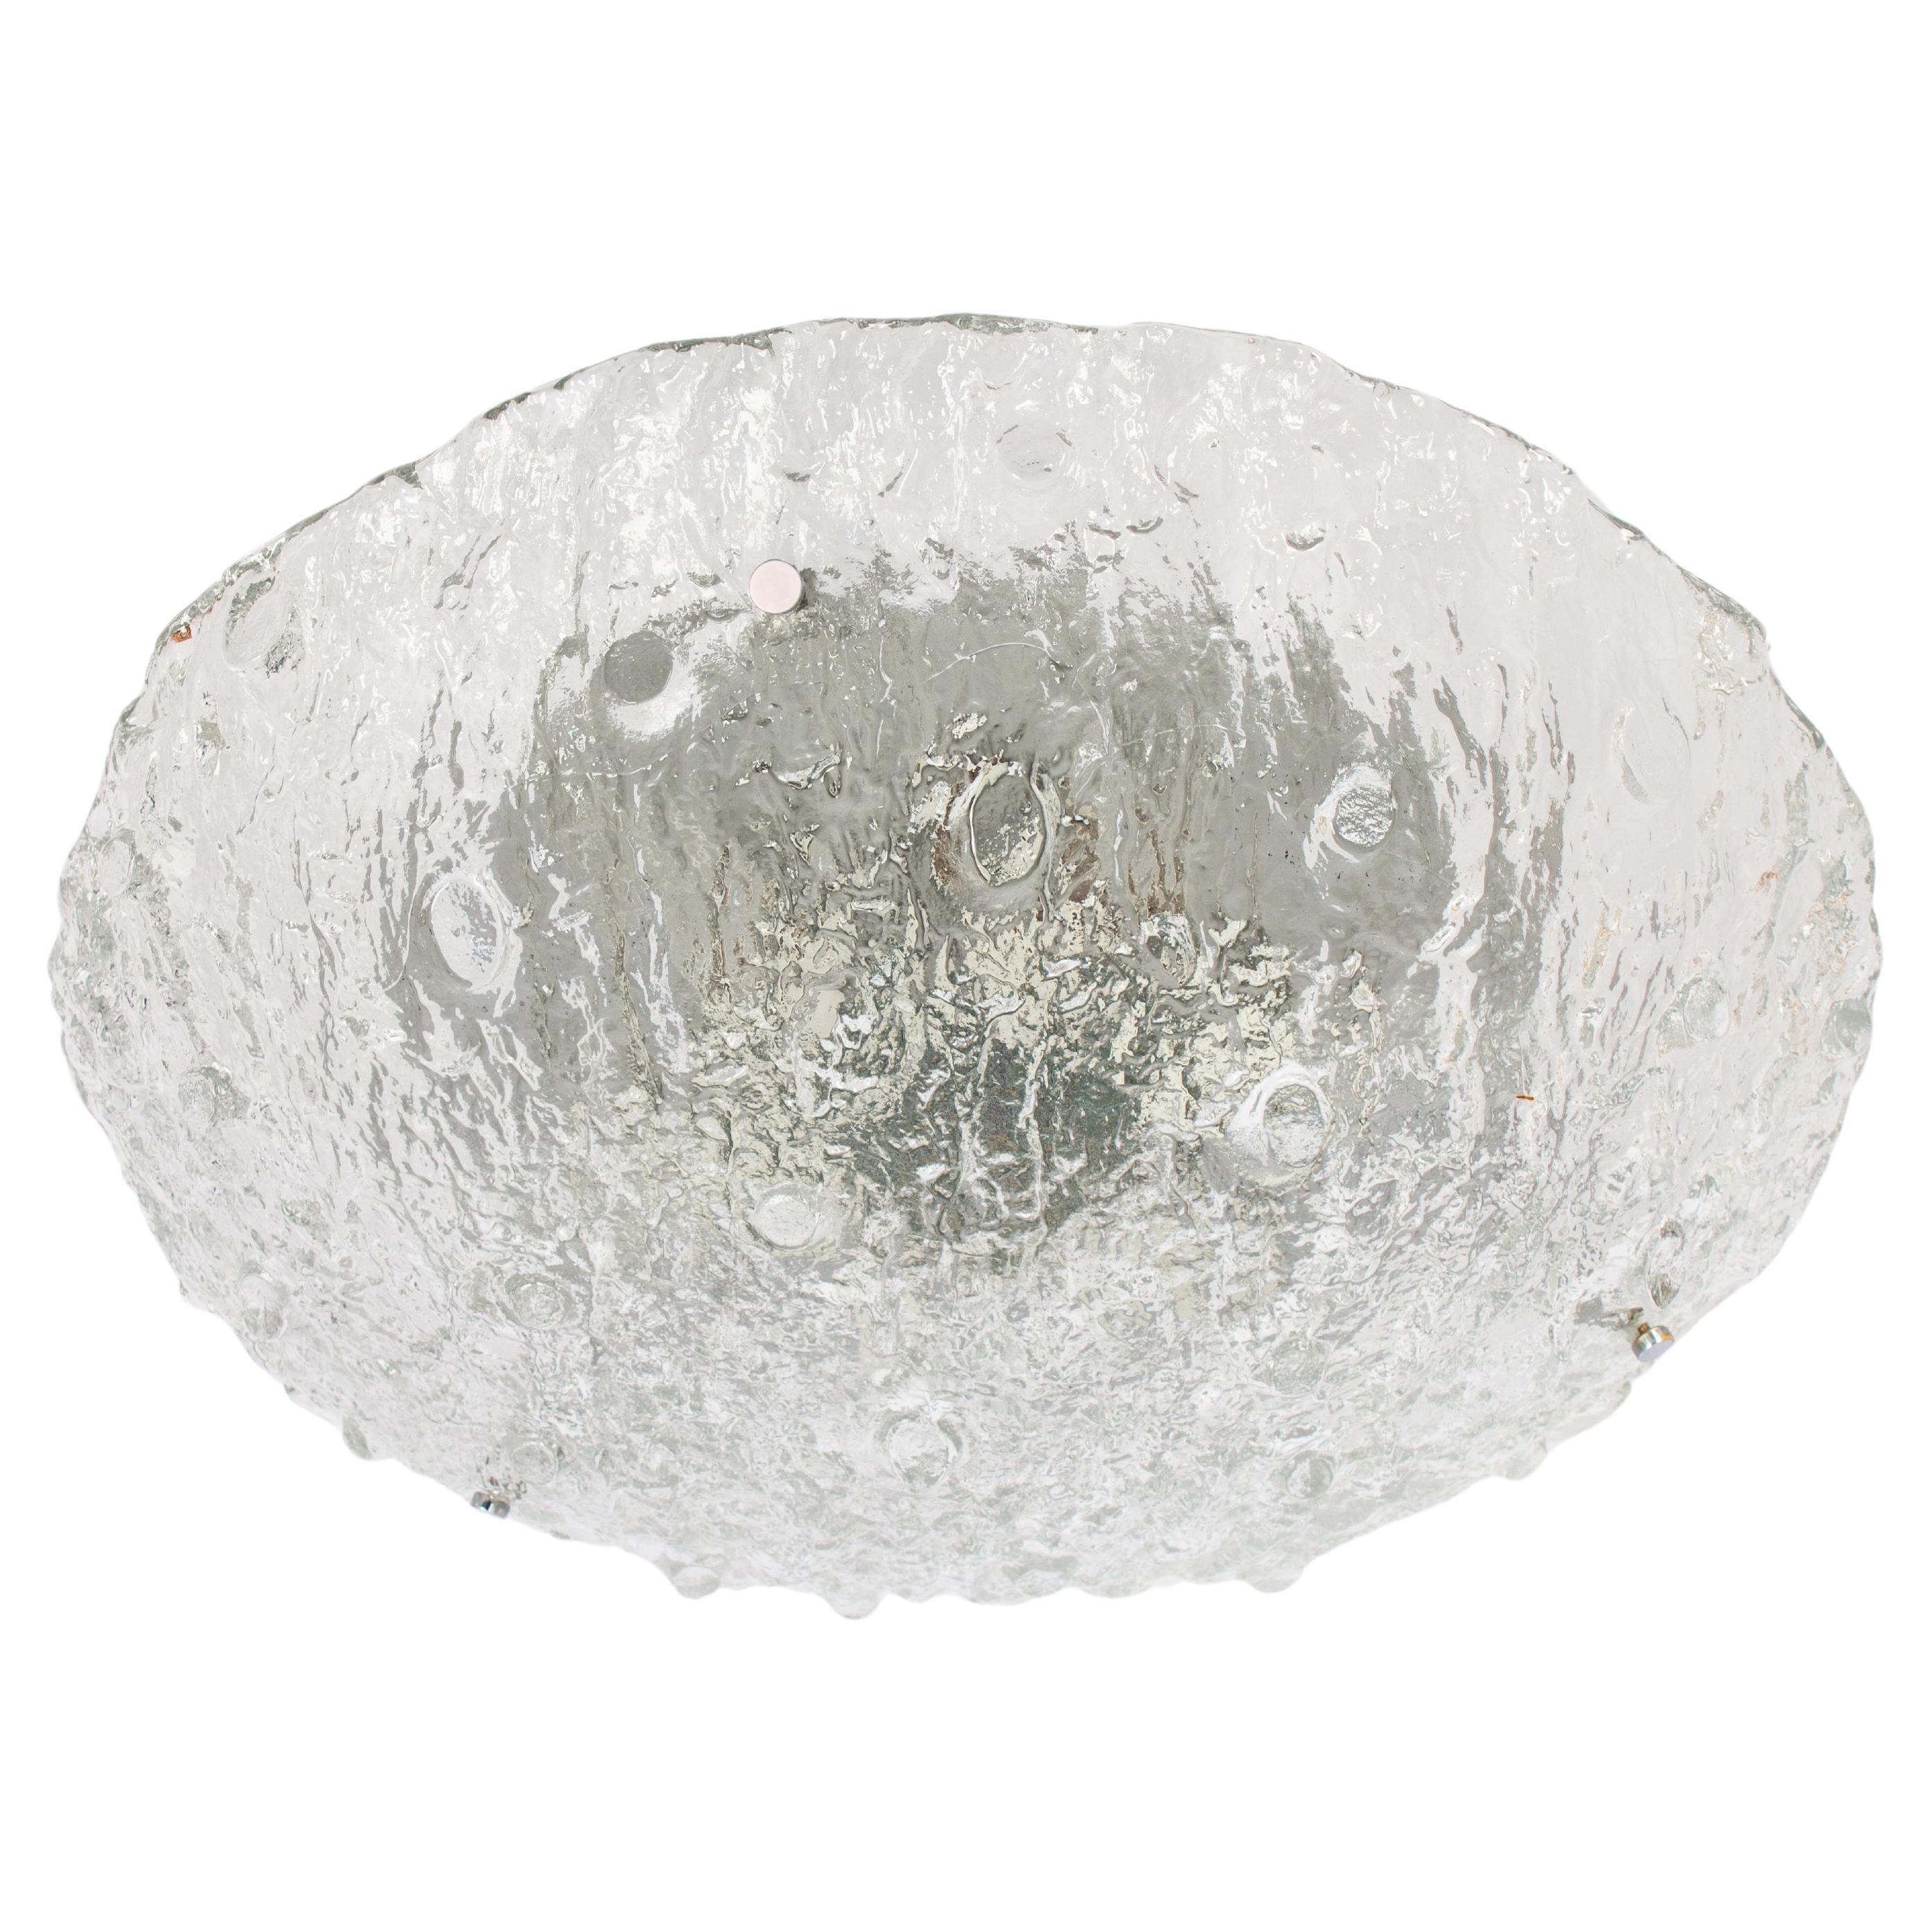 Gorgeous large round shaped flush mount with murano heavy textured clear iced glass on a metal frame with nickel screws. Manufactured in Germany in the 1970s. 

Measures: diameter 21.6